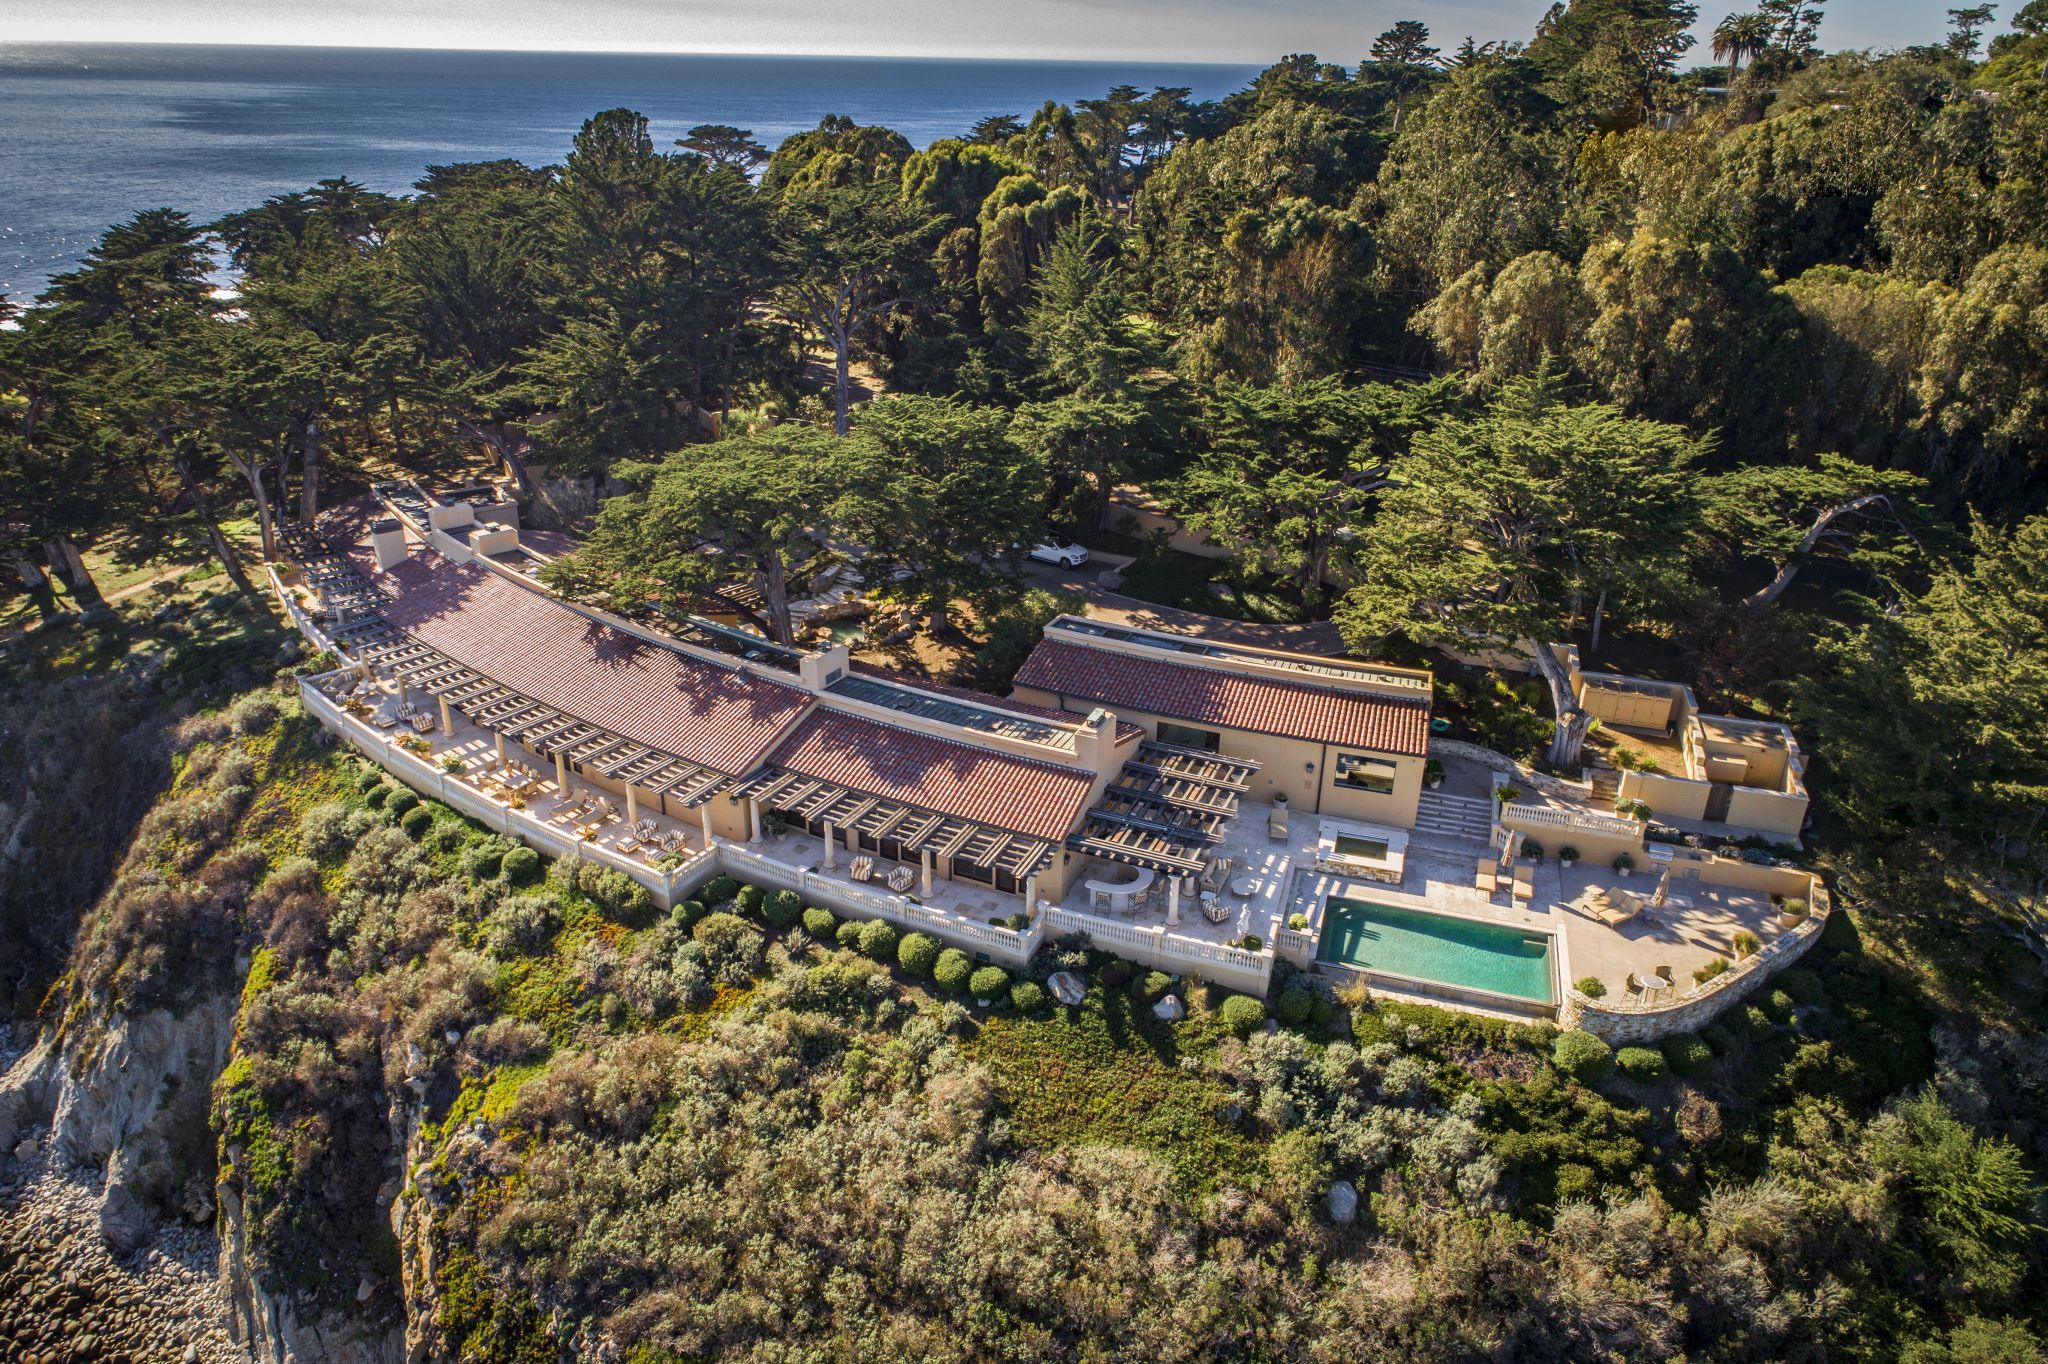 Pebble Beach house built to take in ocean views listed for $34.9 million - SFGate2048 x 1364